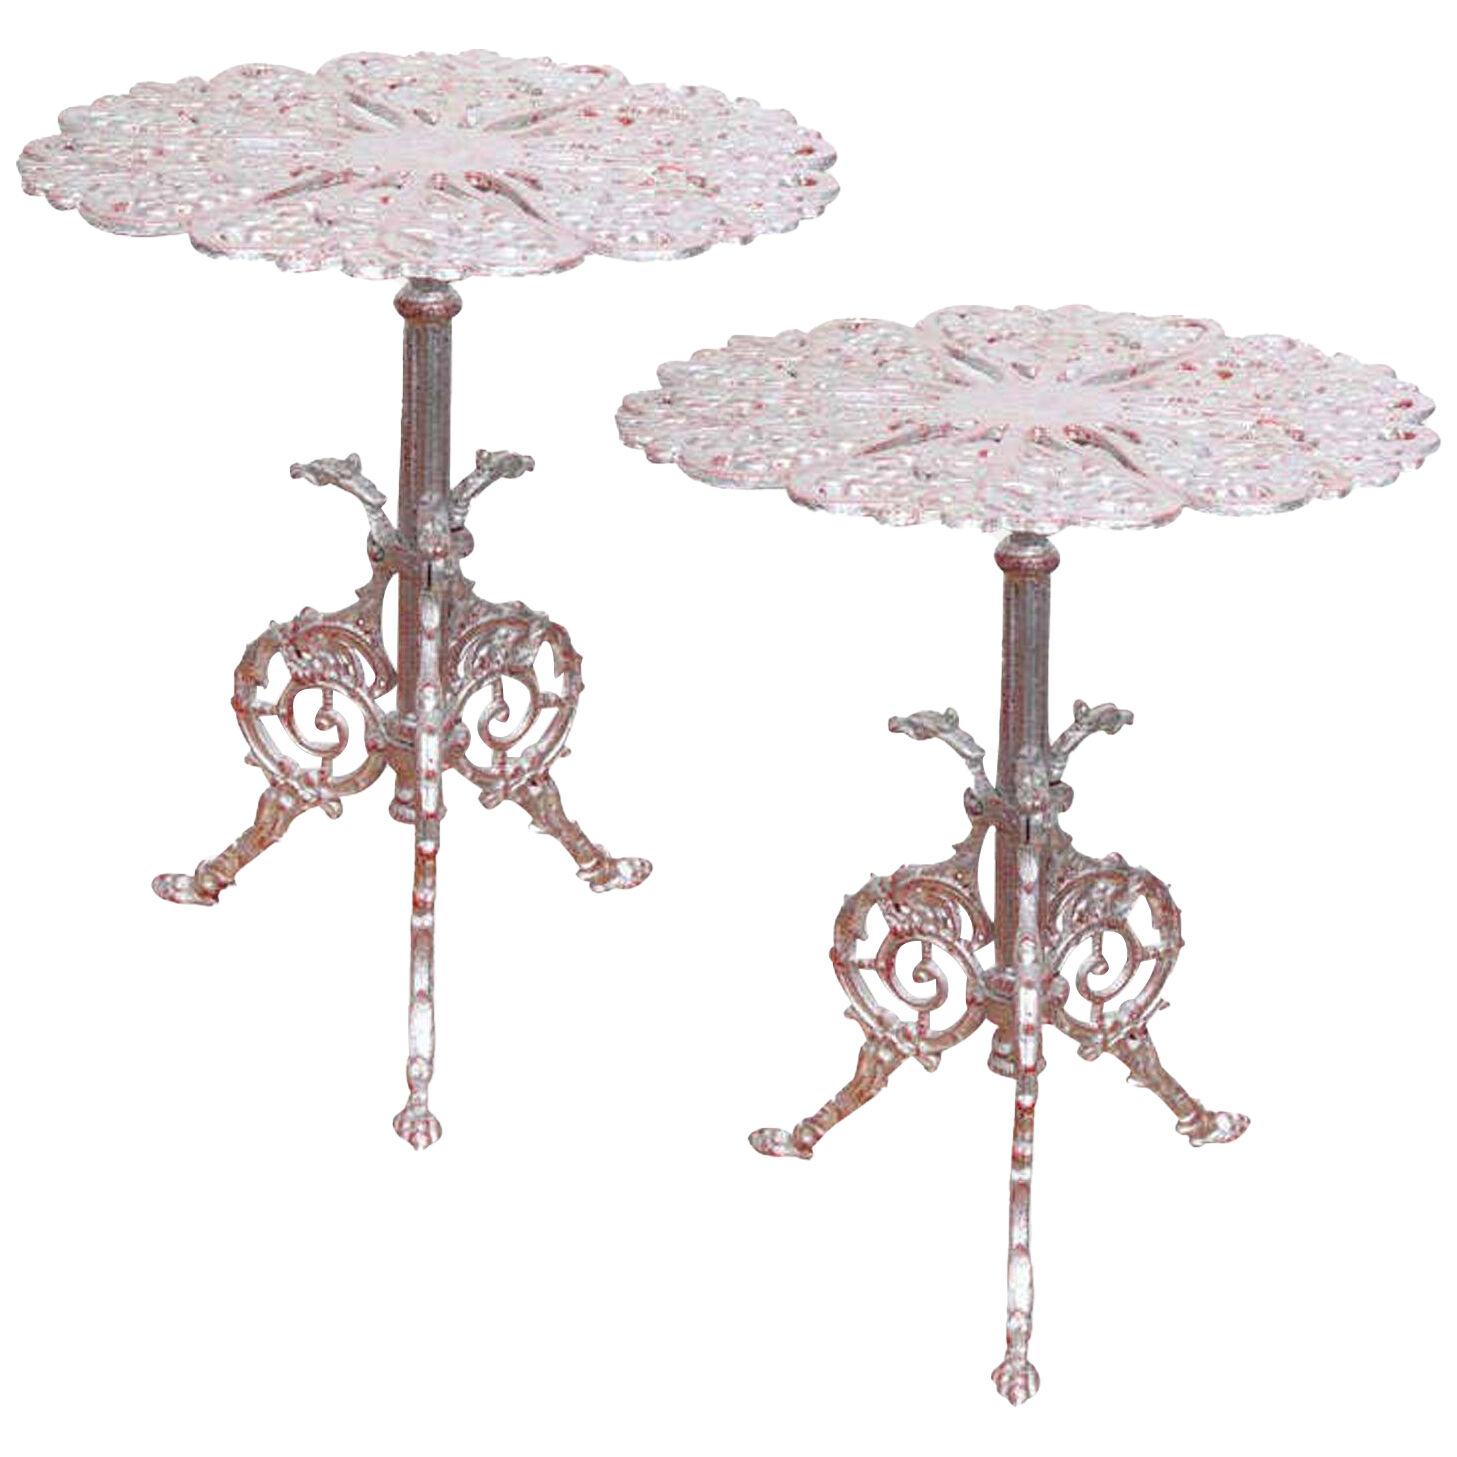 Pair of 1940s Silver Leaves Ornate Wrought Iron Round Side Tables